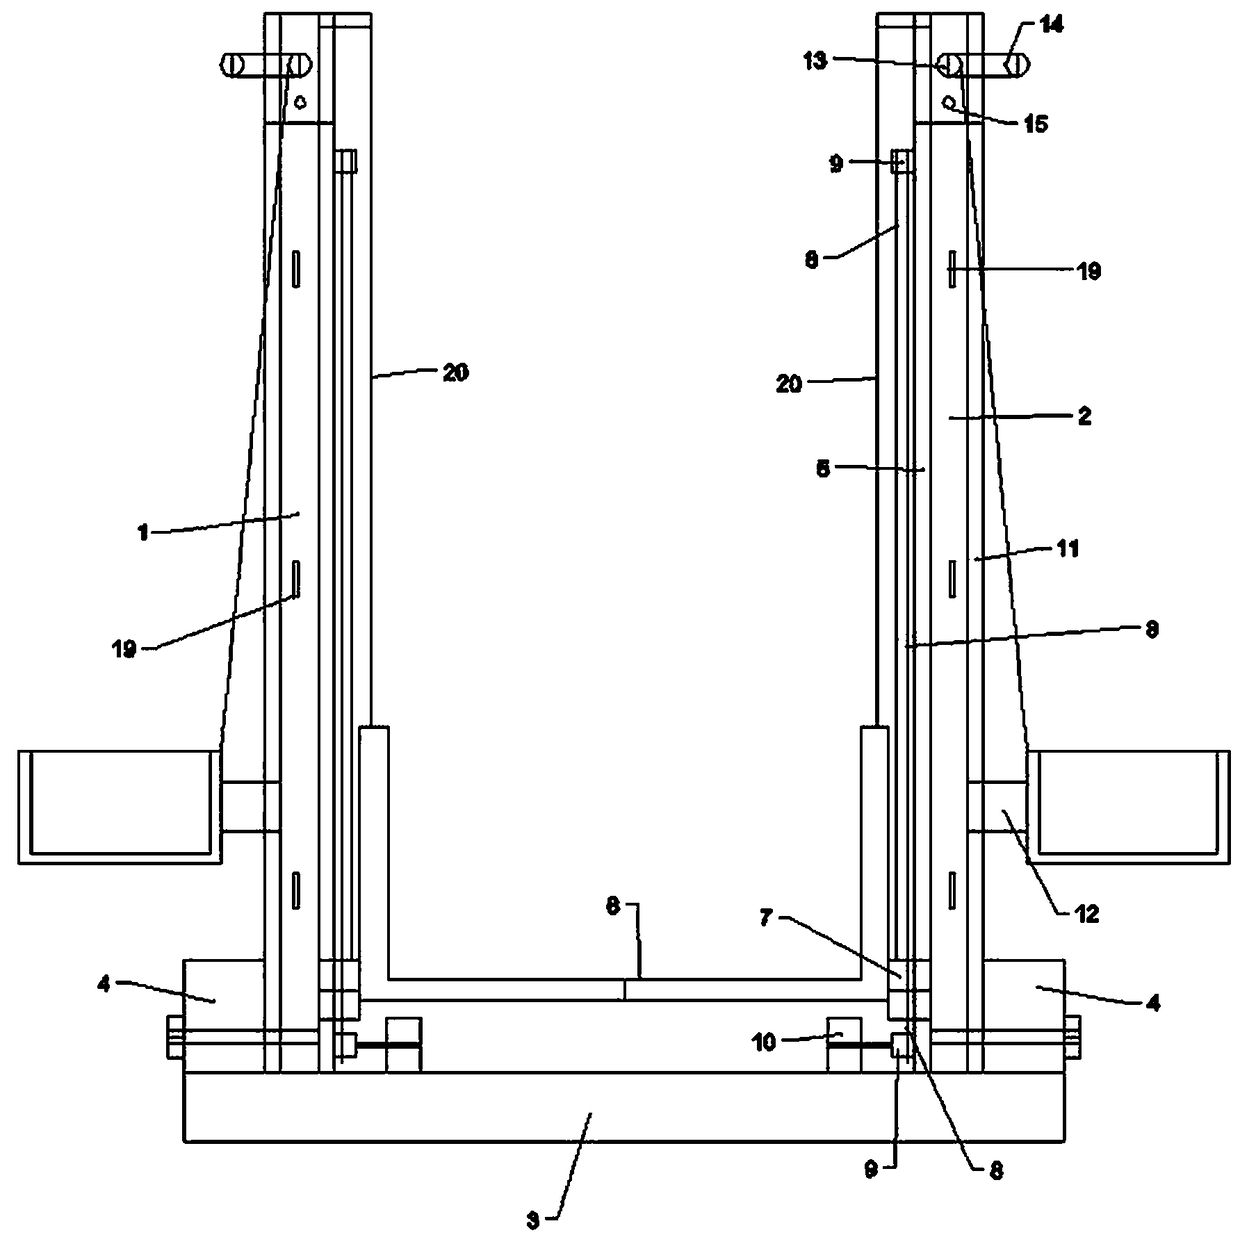 Interior design companion ladder used for assembly building